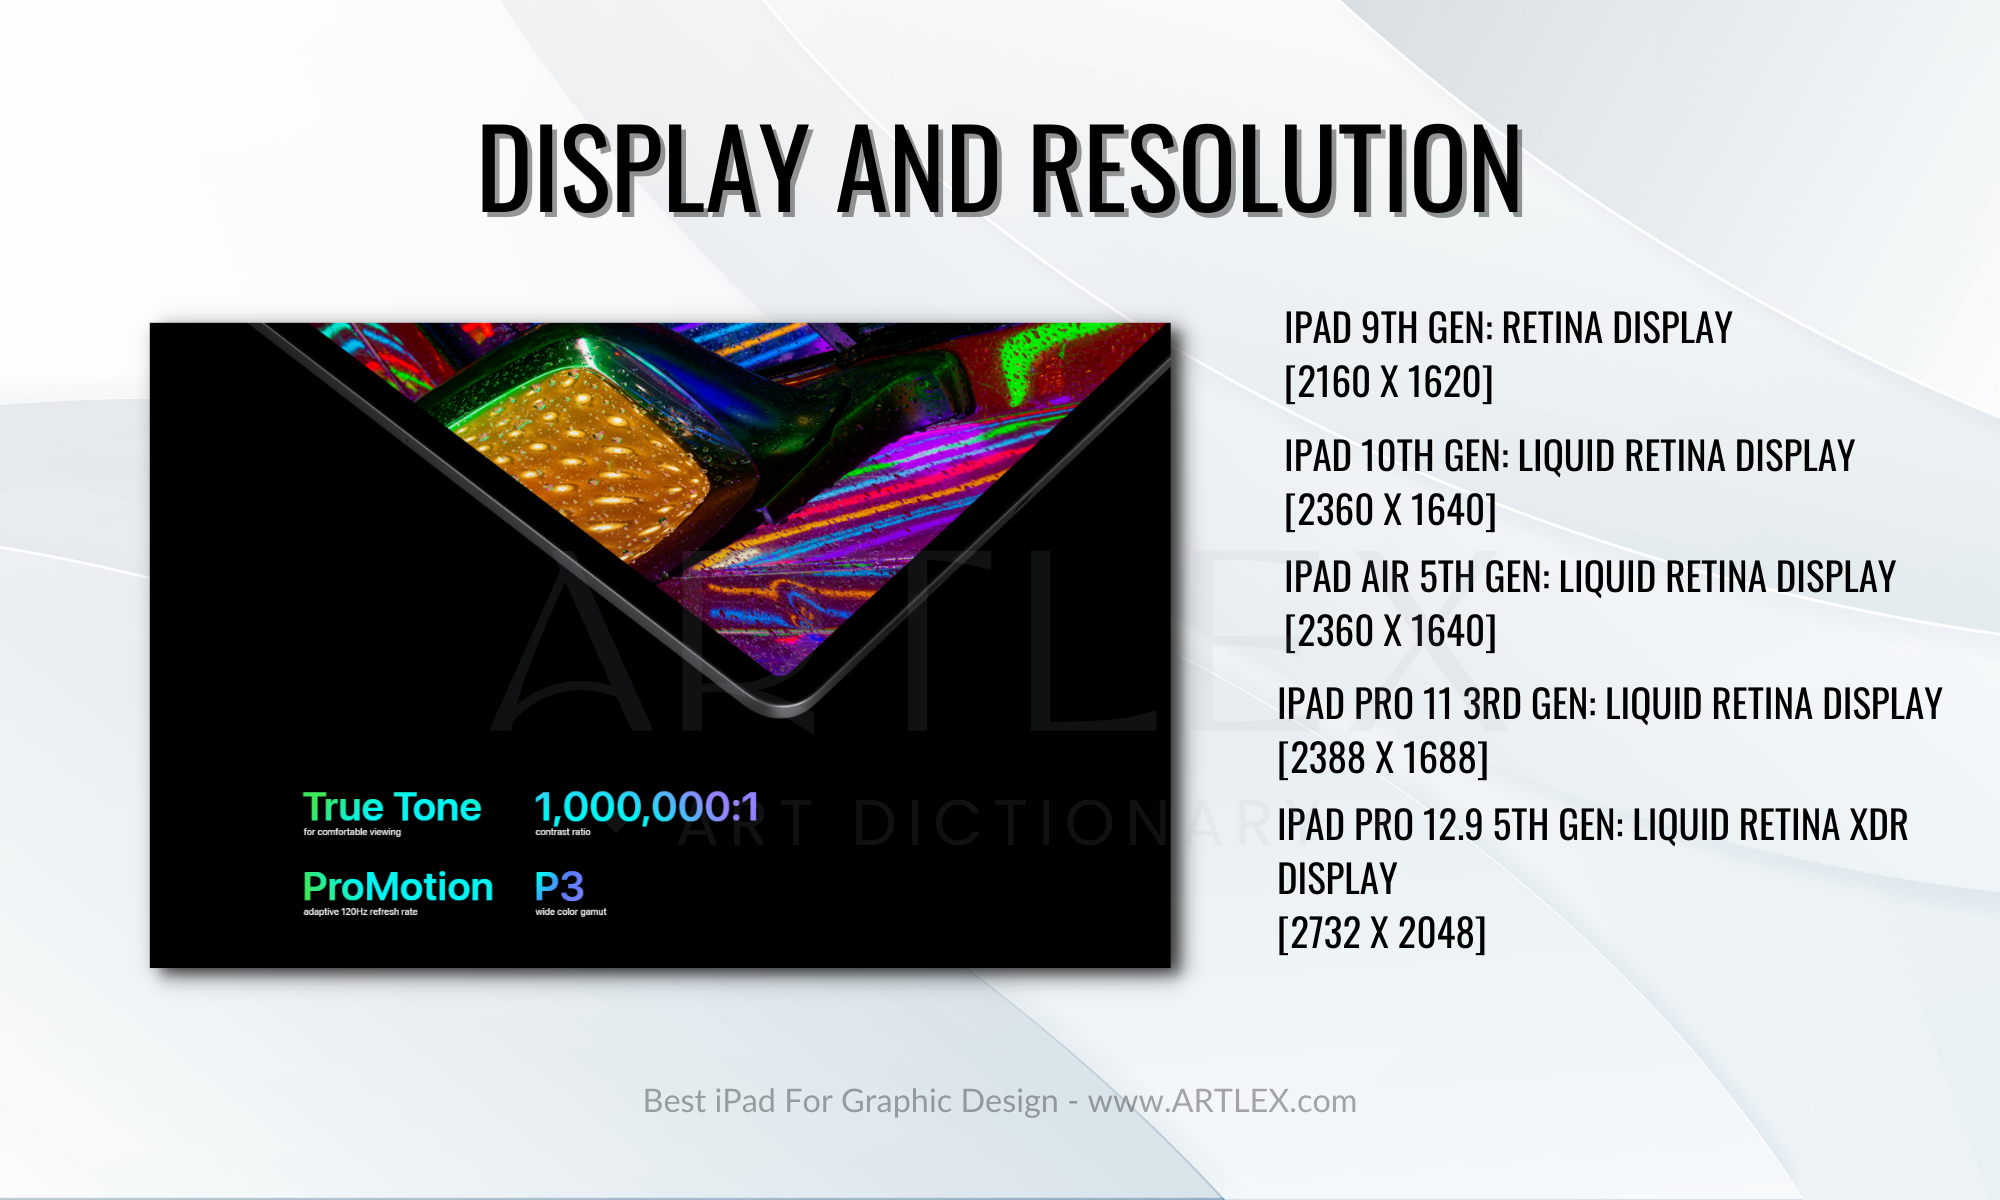 iPad Display and Resolution for Graphic Design